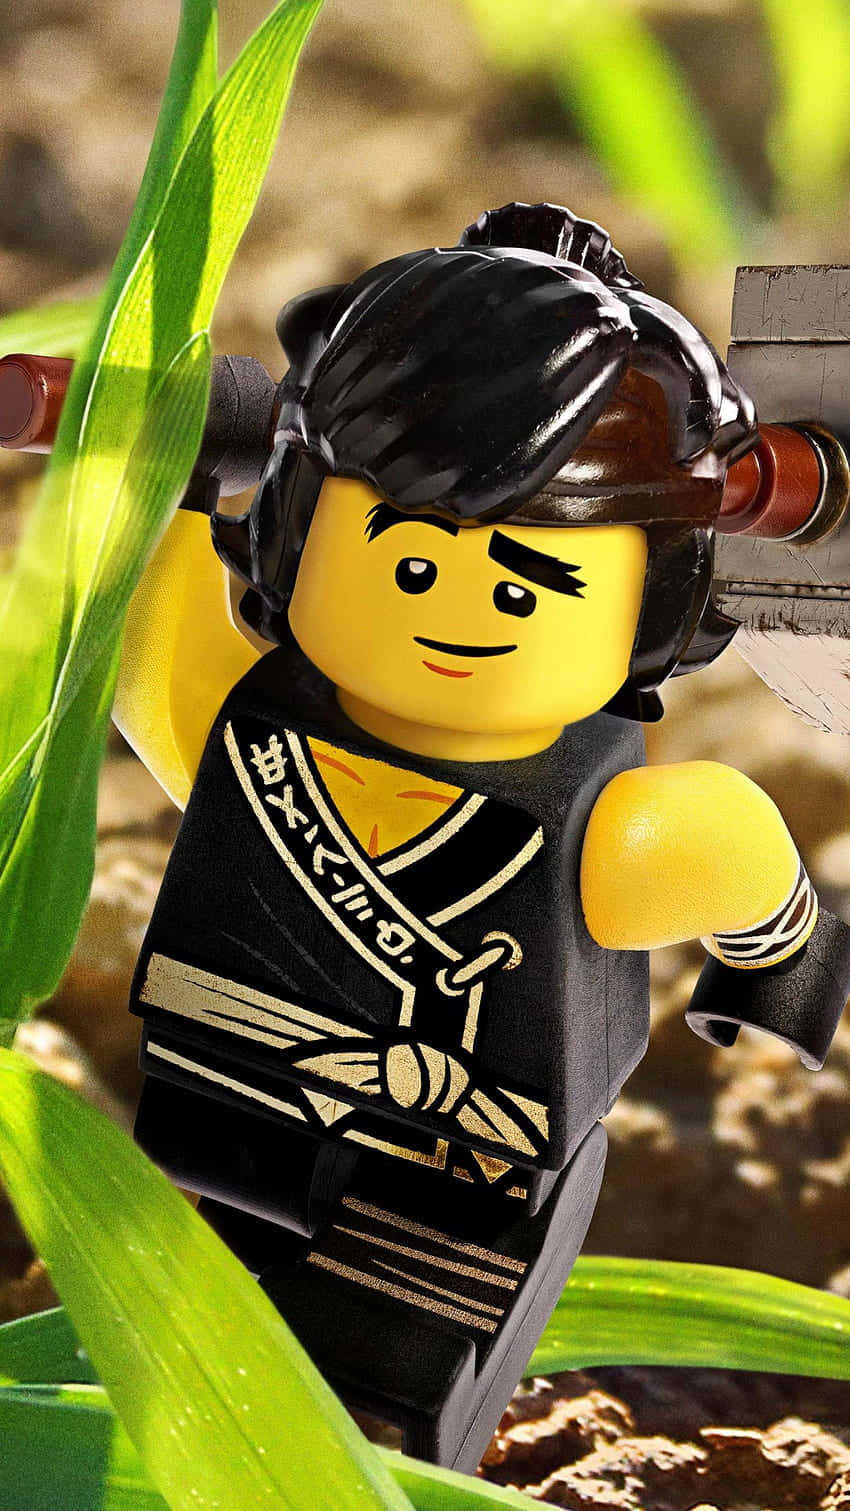 Cole In Grass From The Lego Ninjago Movie Wallpaper